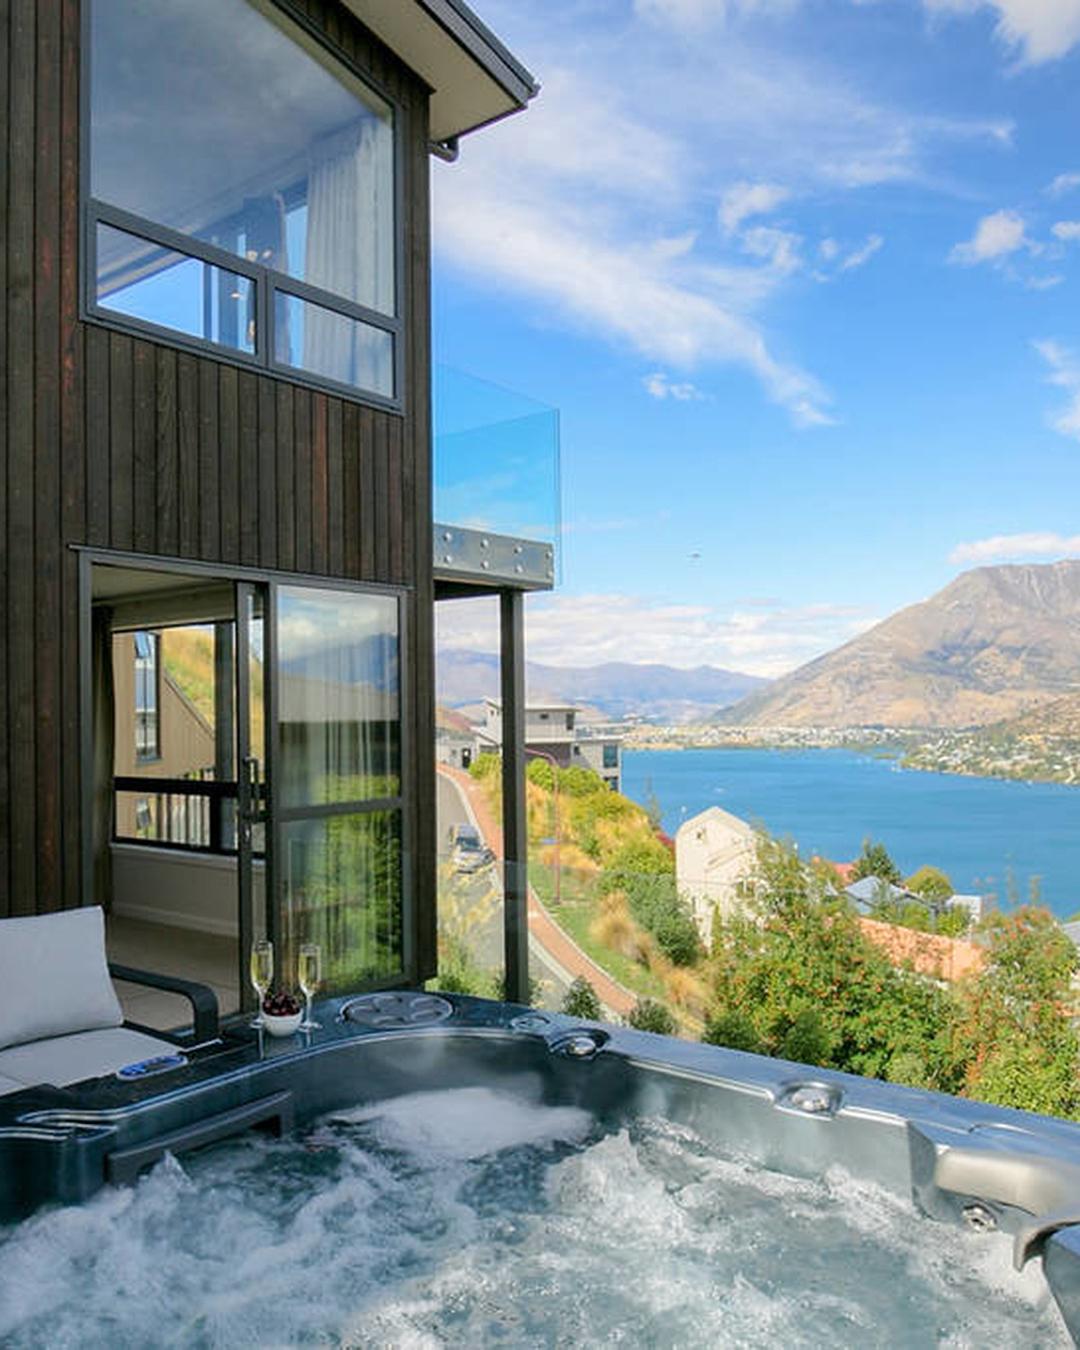 10 Of The Best Airbnbs With Outdoor Baths And Hot Tubs In NZ